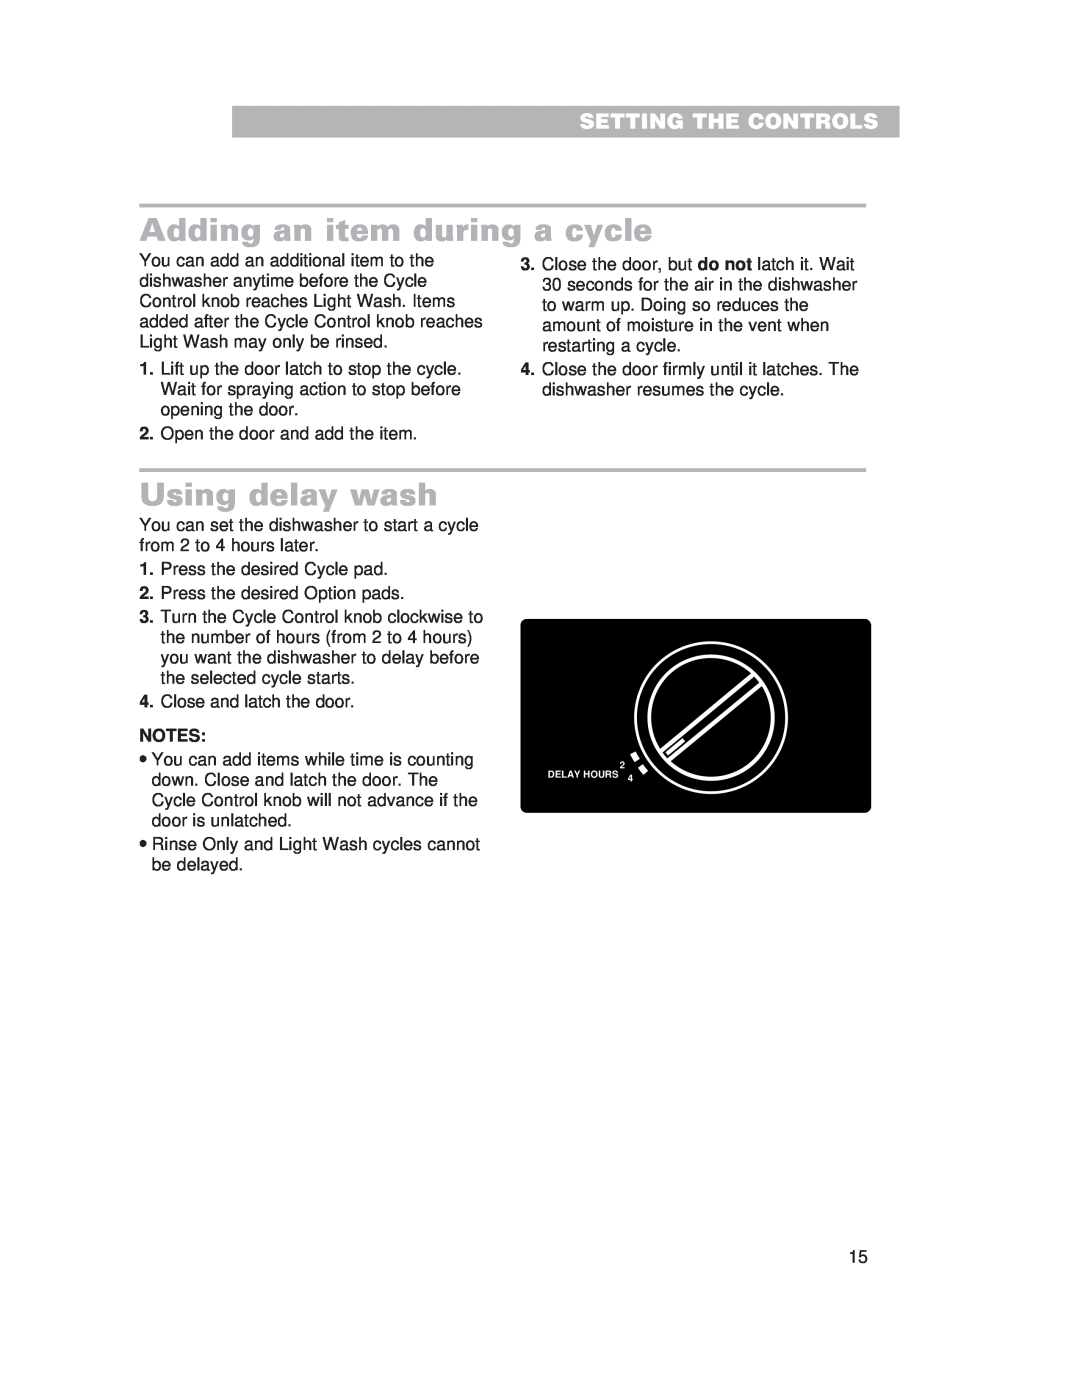 Whirlpool 910 Series warranty Adding an item during a cycle, Using delay wash, Setting The Controls 